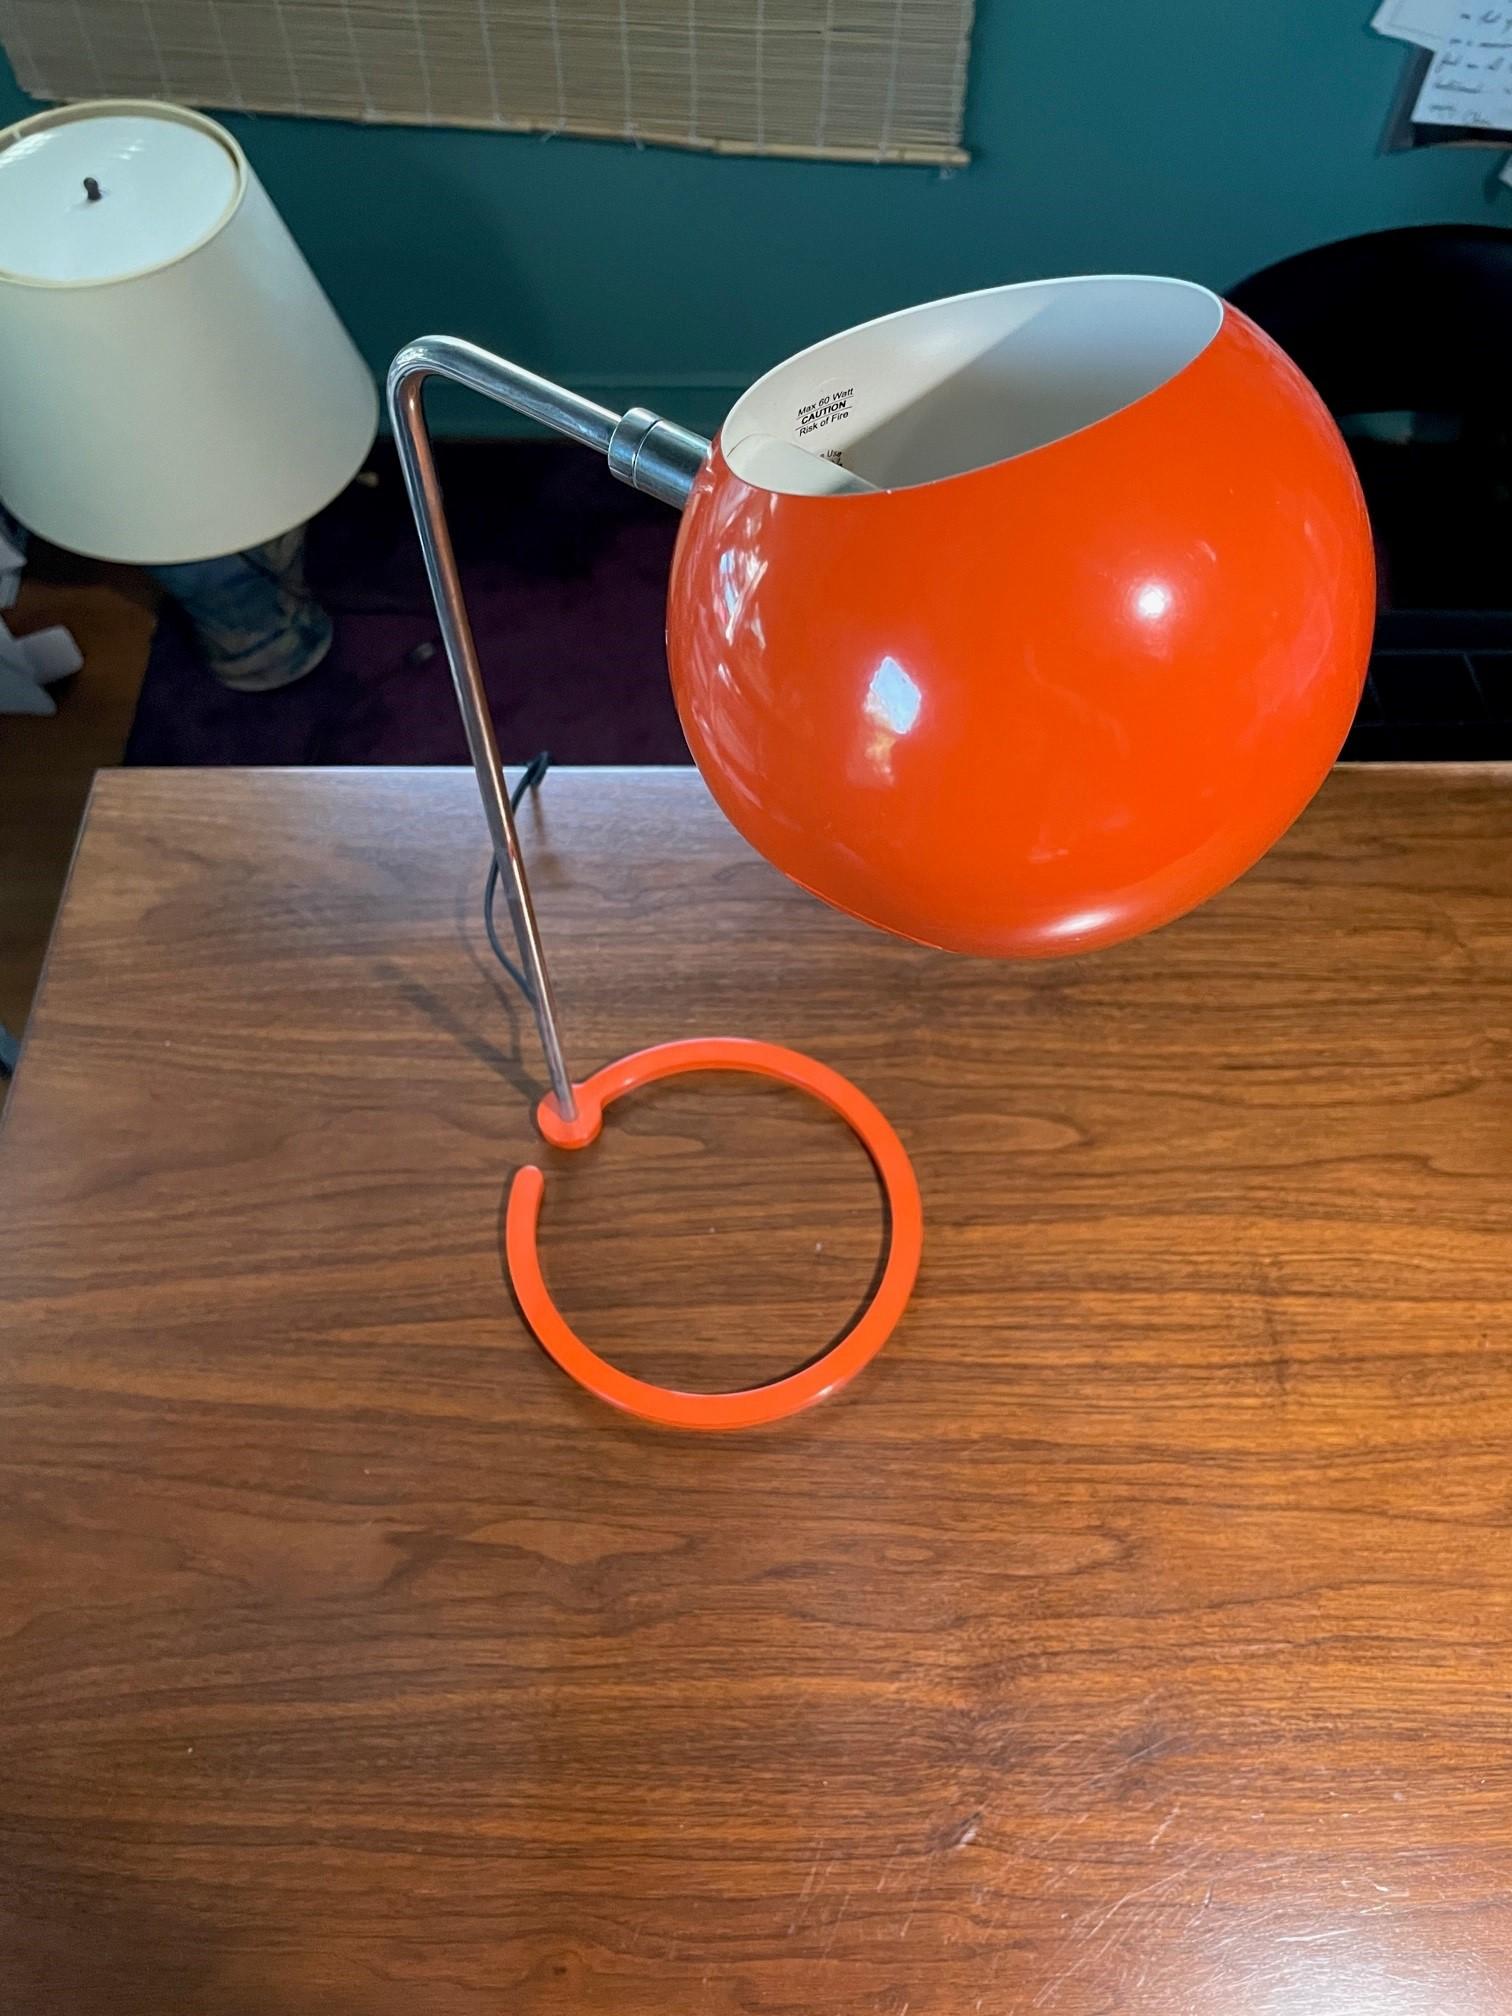 Beautiful David Weeks Studio 'Boi' Table Lamp in Orange Gloss Exterior Finish, Ivory Satin Interior. Features a powder coated steel shade and weighted ring base. The shade rotates 320 degrees to cast light directionally. Shade and base is powder